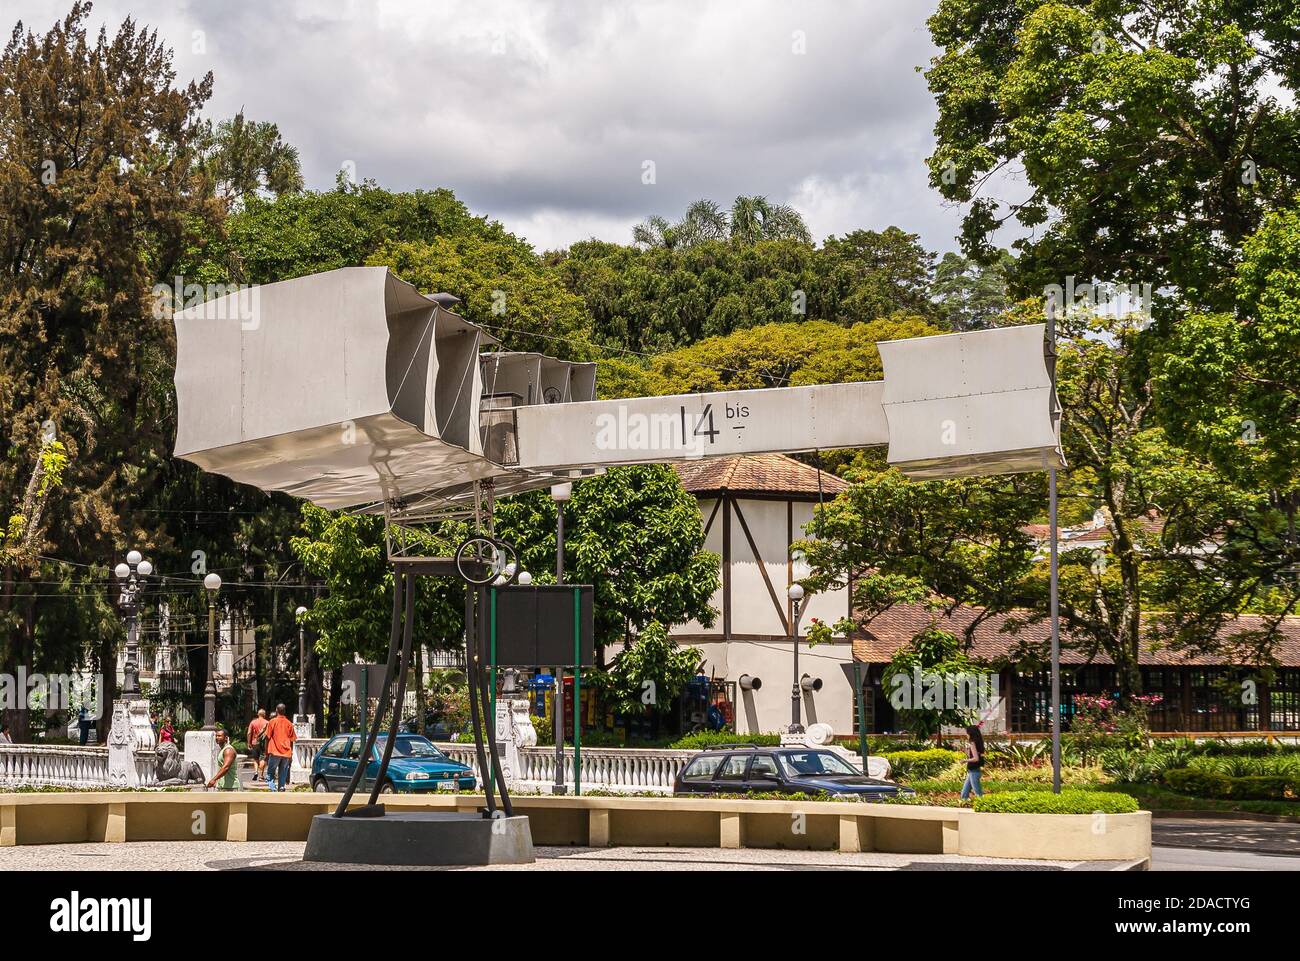 Petropolis, Brazil - December 23, 2008: Gray statue of flimsy historic flying machine in park full of green trees. Cars and people around, under gray Stock Photo